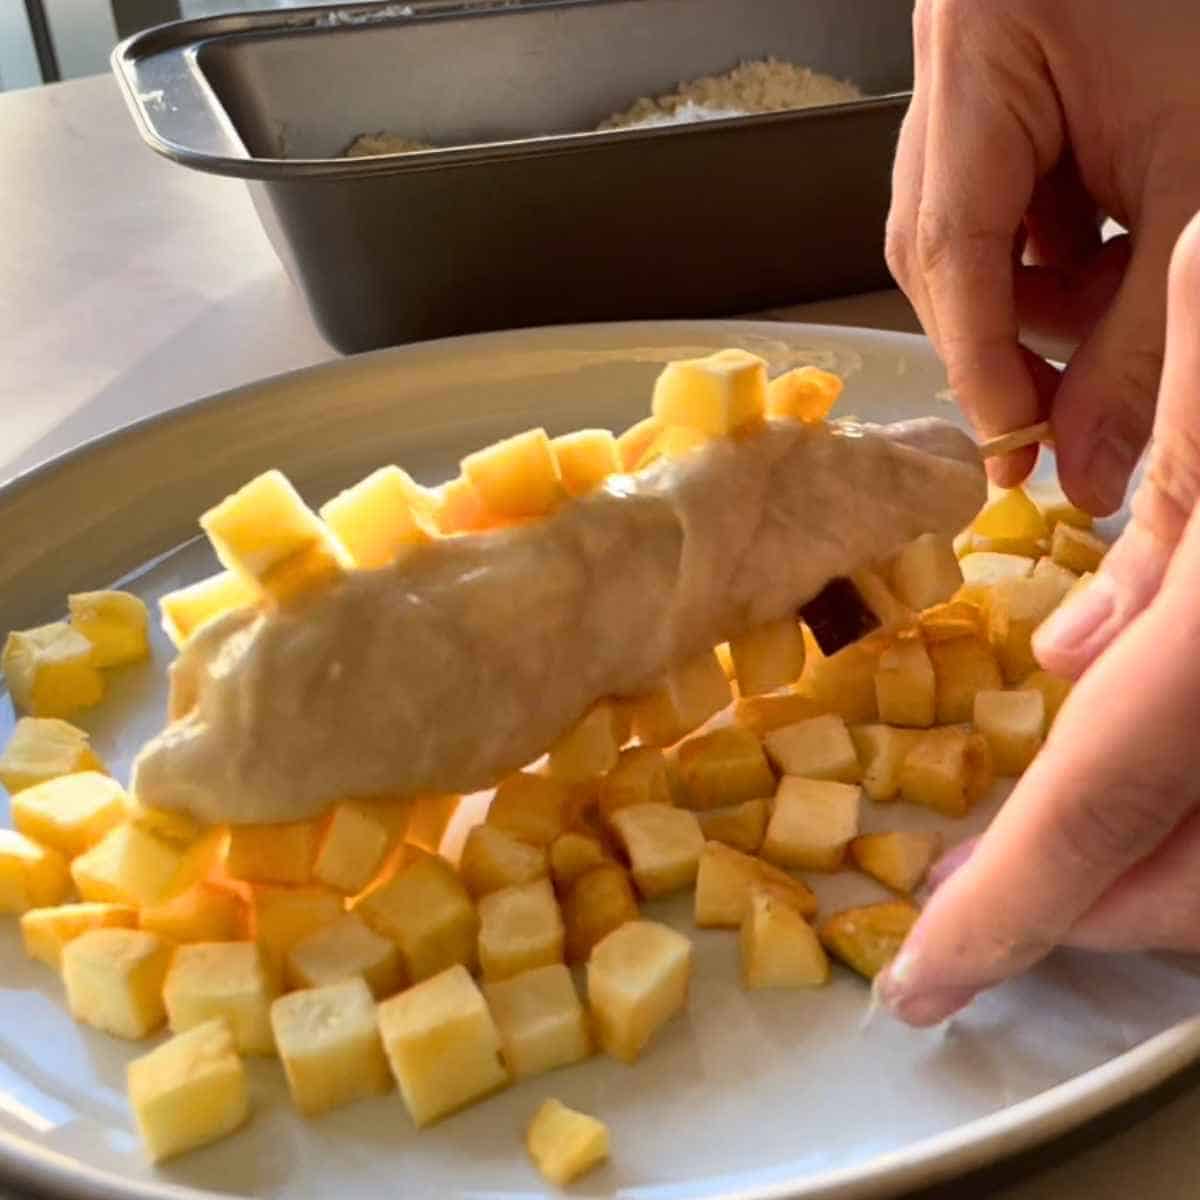 Rolling potatoes with batter